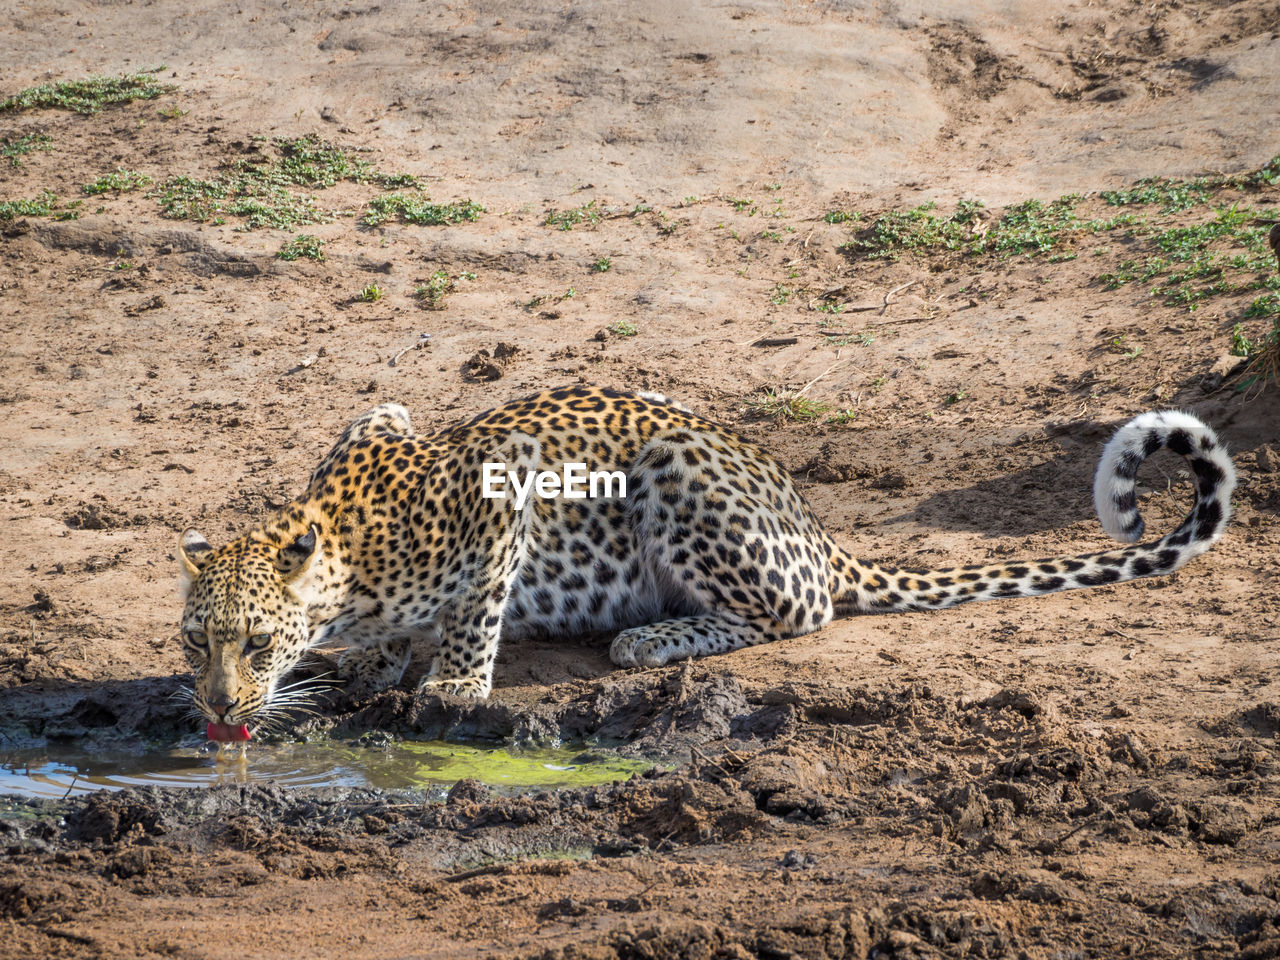 Young leopard drinking at water hole in kruger national park, south africa